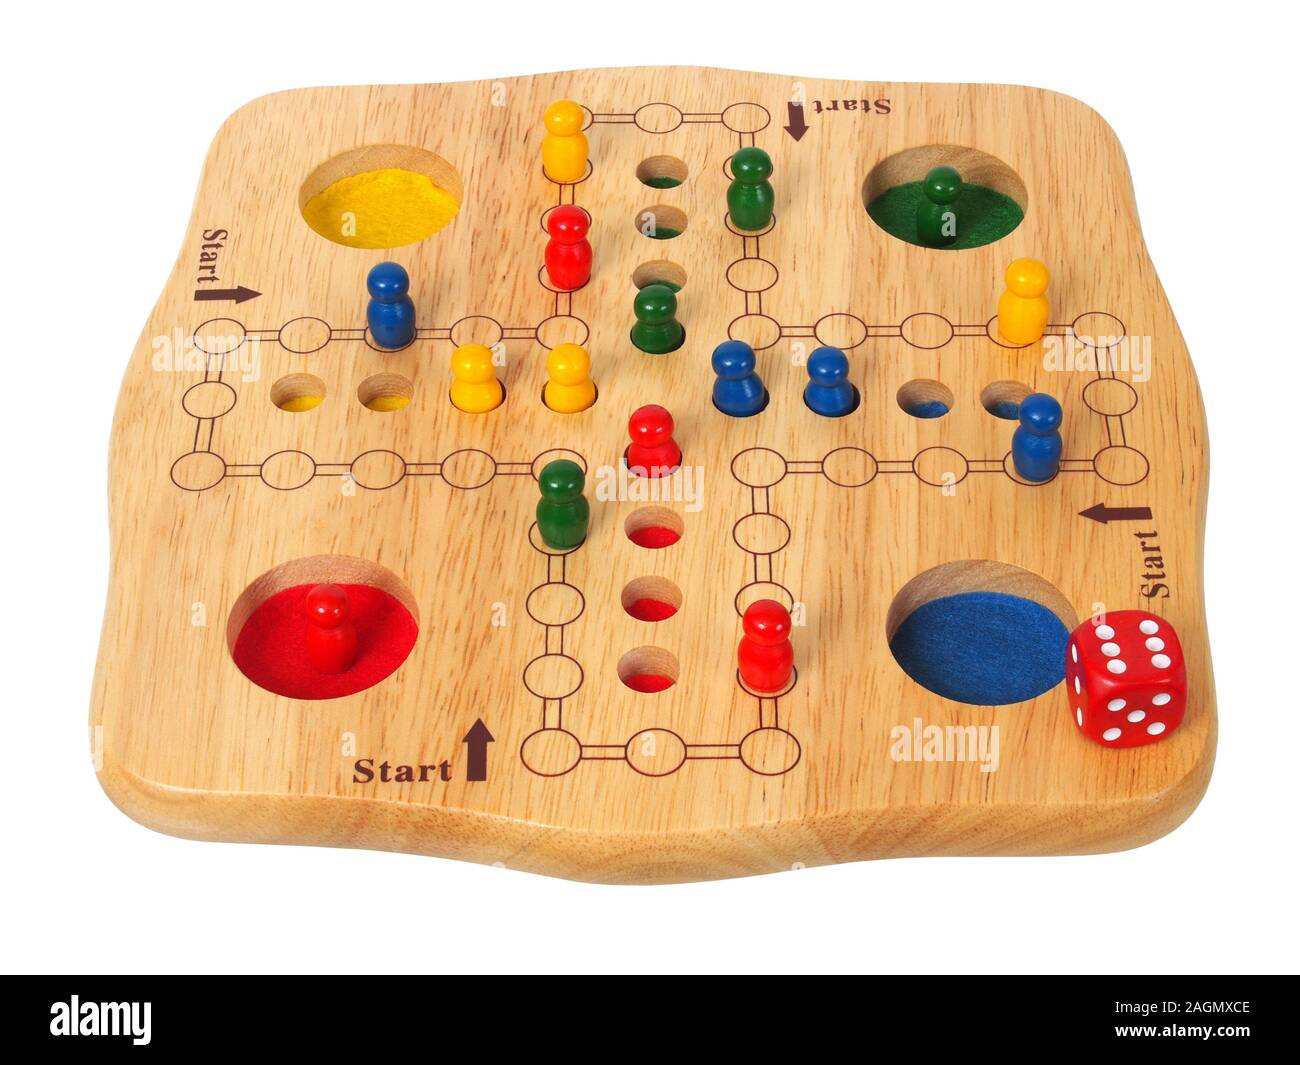 Ludo board game with die and pieces Stock Photo